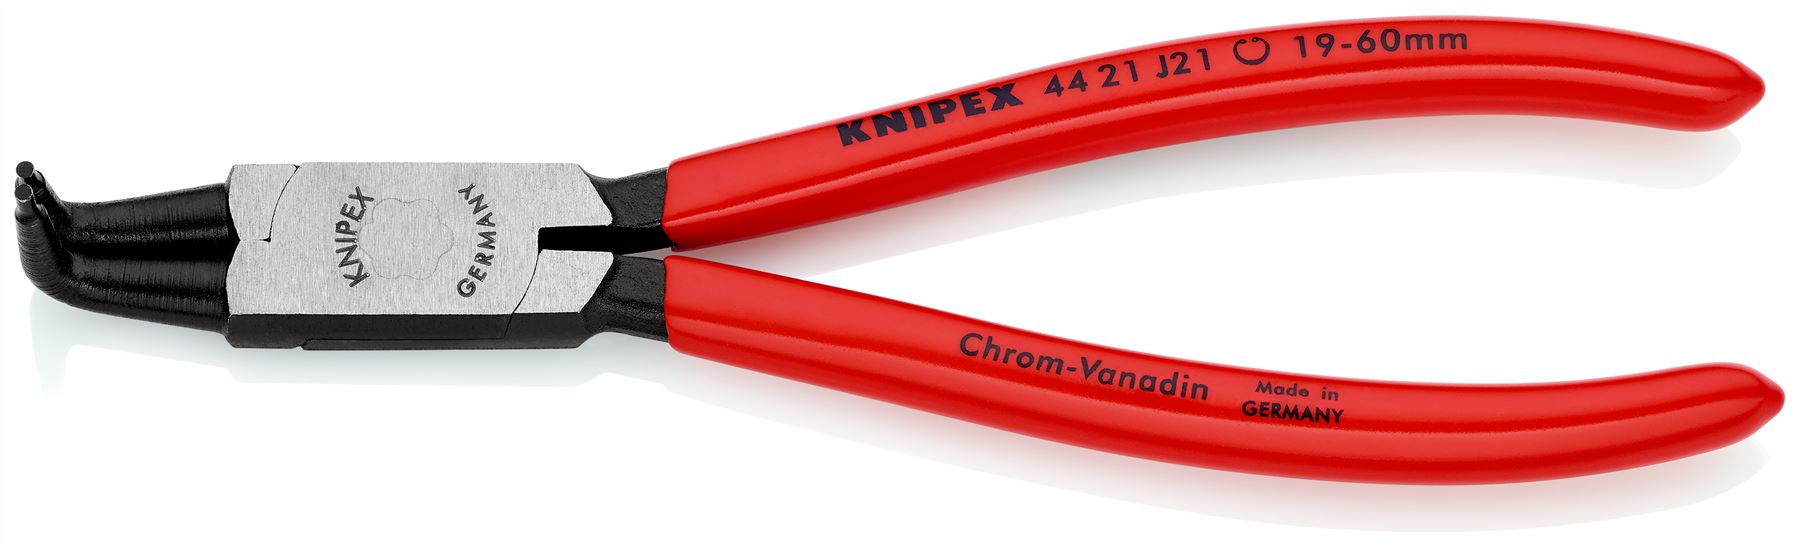 KNIPEX Circlip Pliers for Internal Circlips in Bore Holes Bent Nose 170mm 1.8mm Diameter Tips 44 21 J21